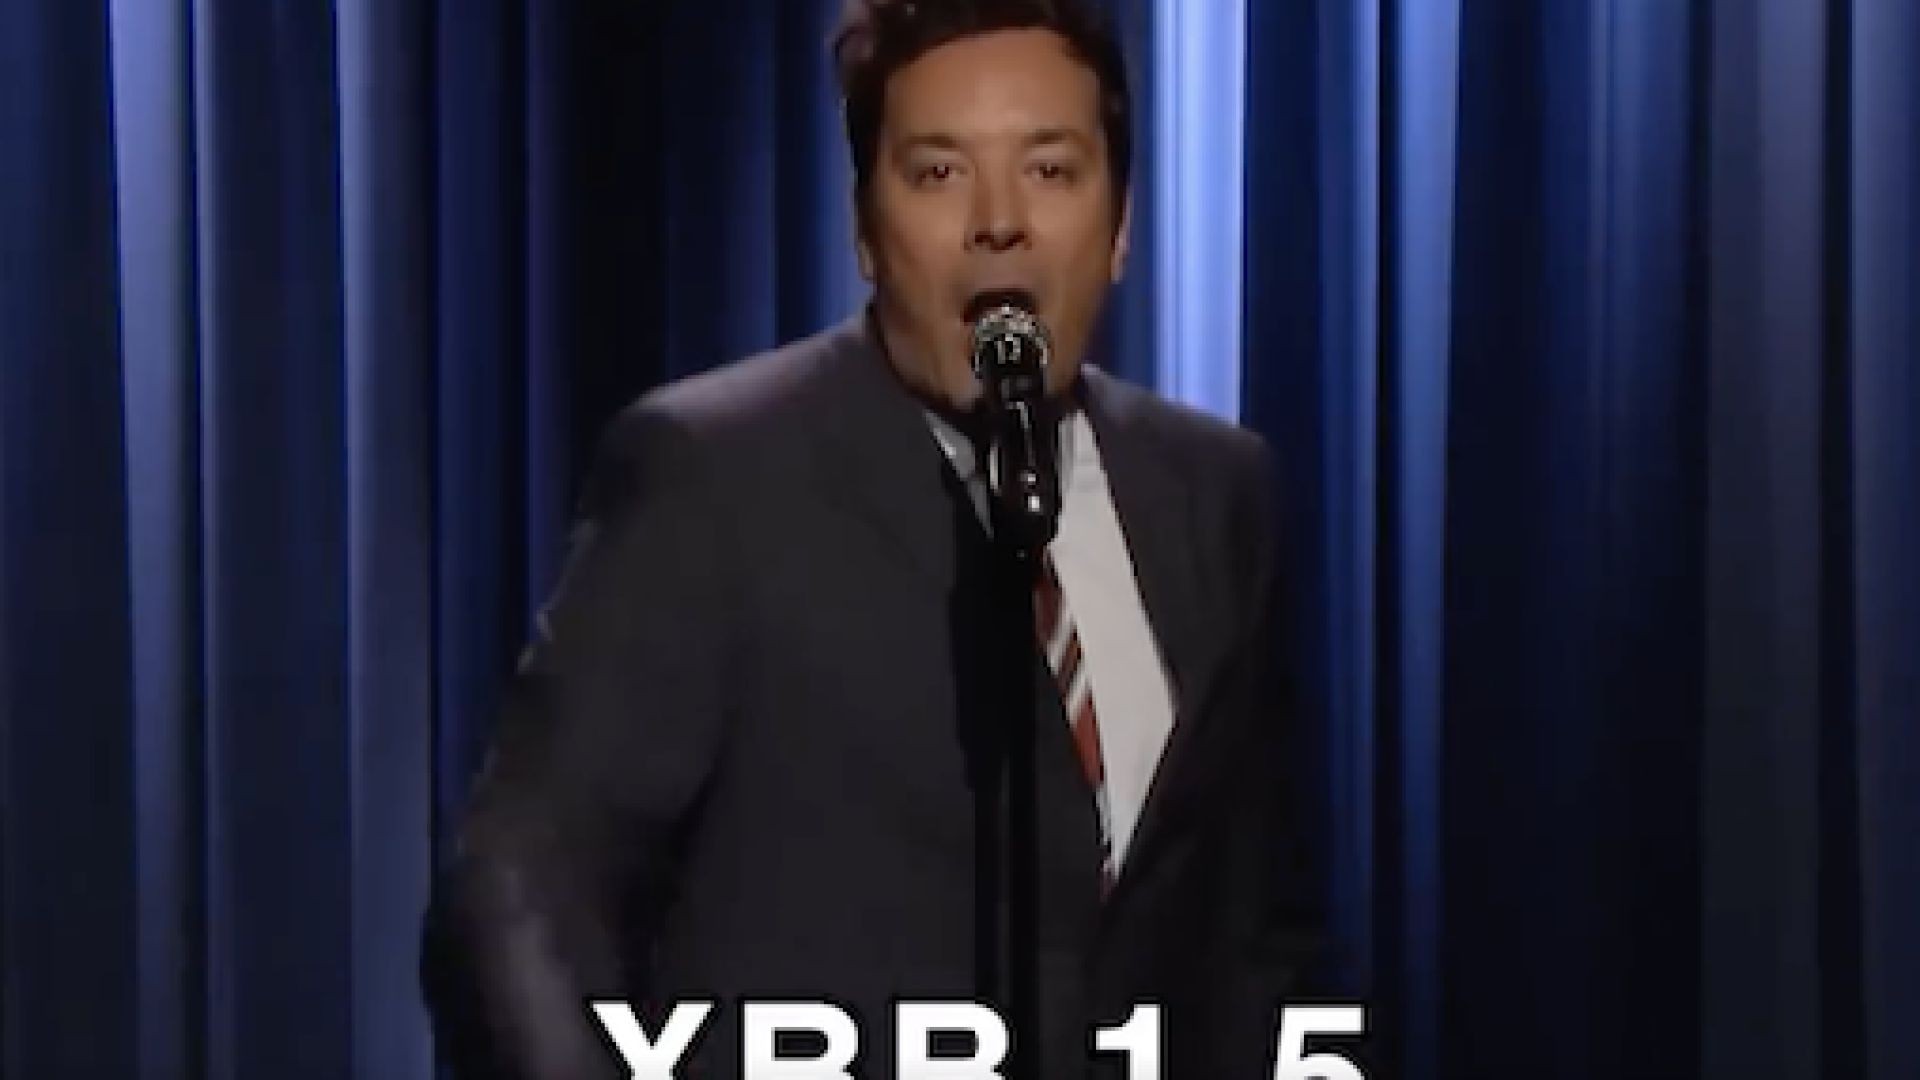 Jimmy Fallon Makes Light of Variant, Vaccinated More Likely to Get New Variant